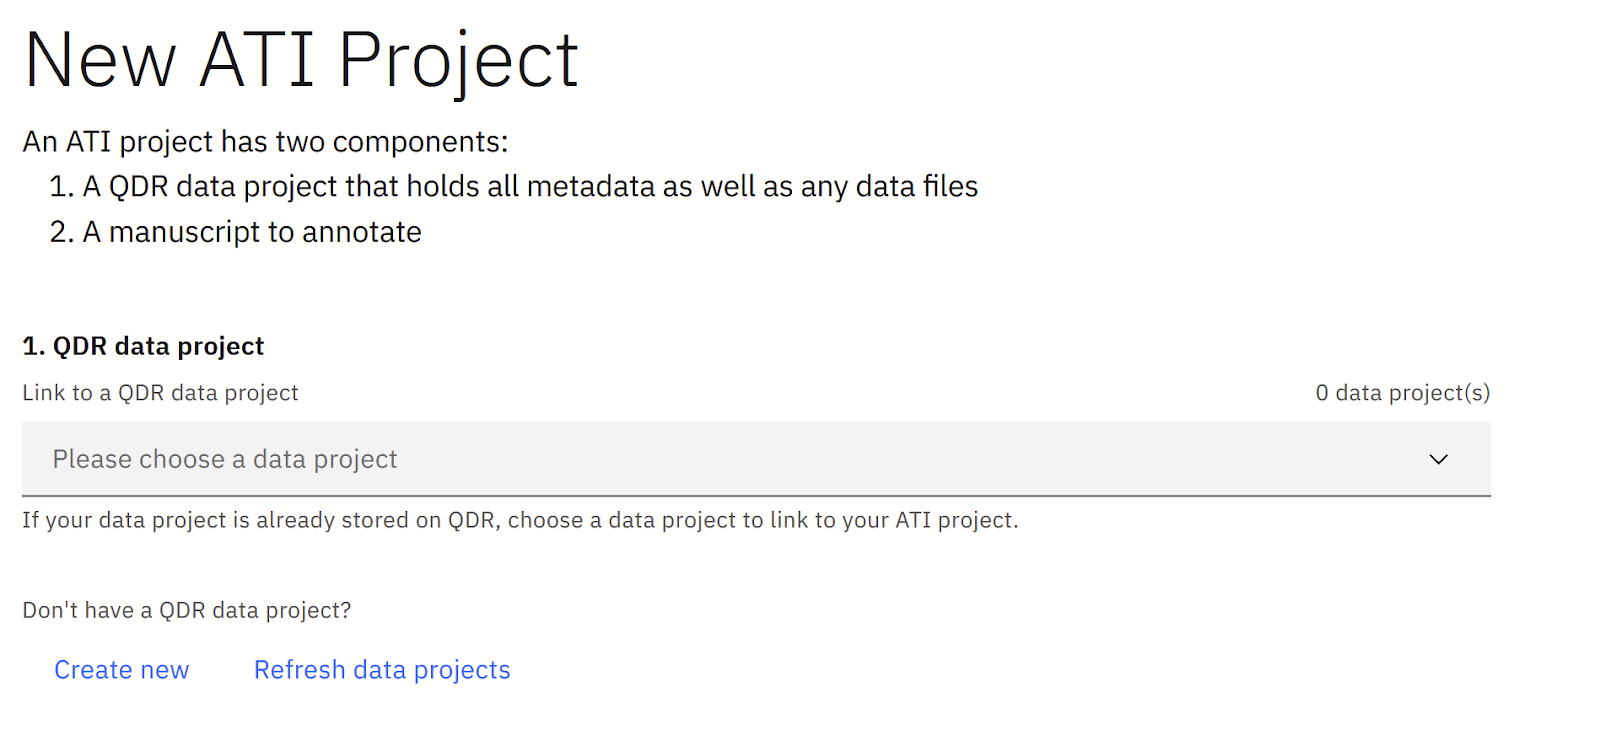 The drop-down menu allowing one to link their ATI project to a QDR data project